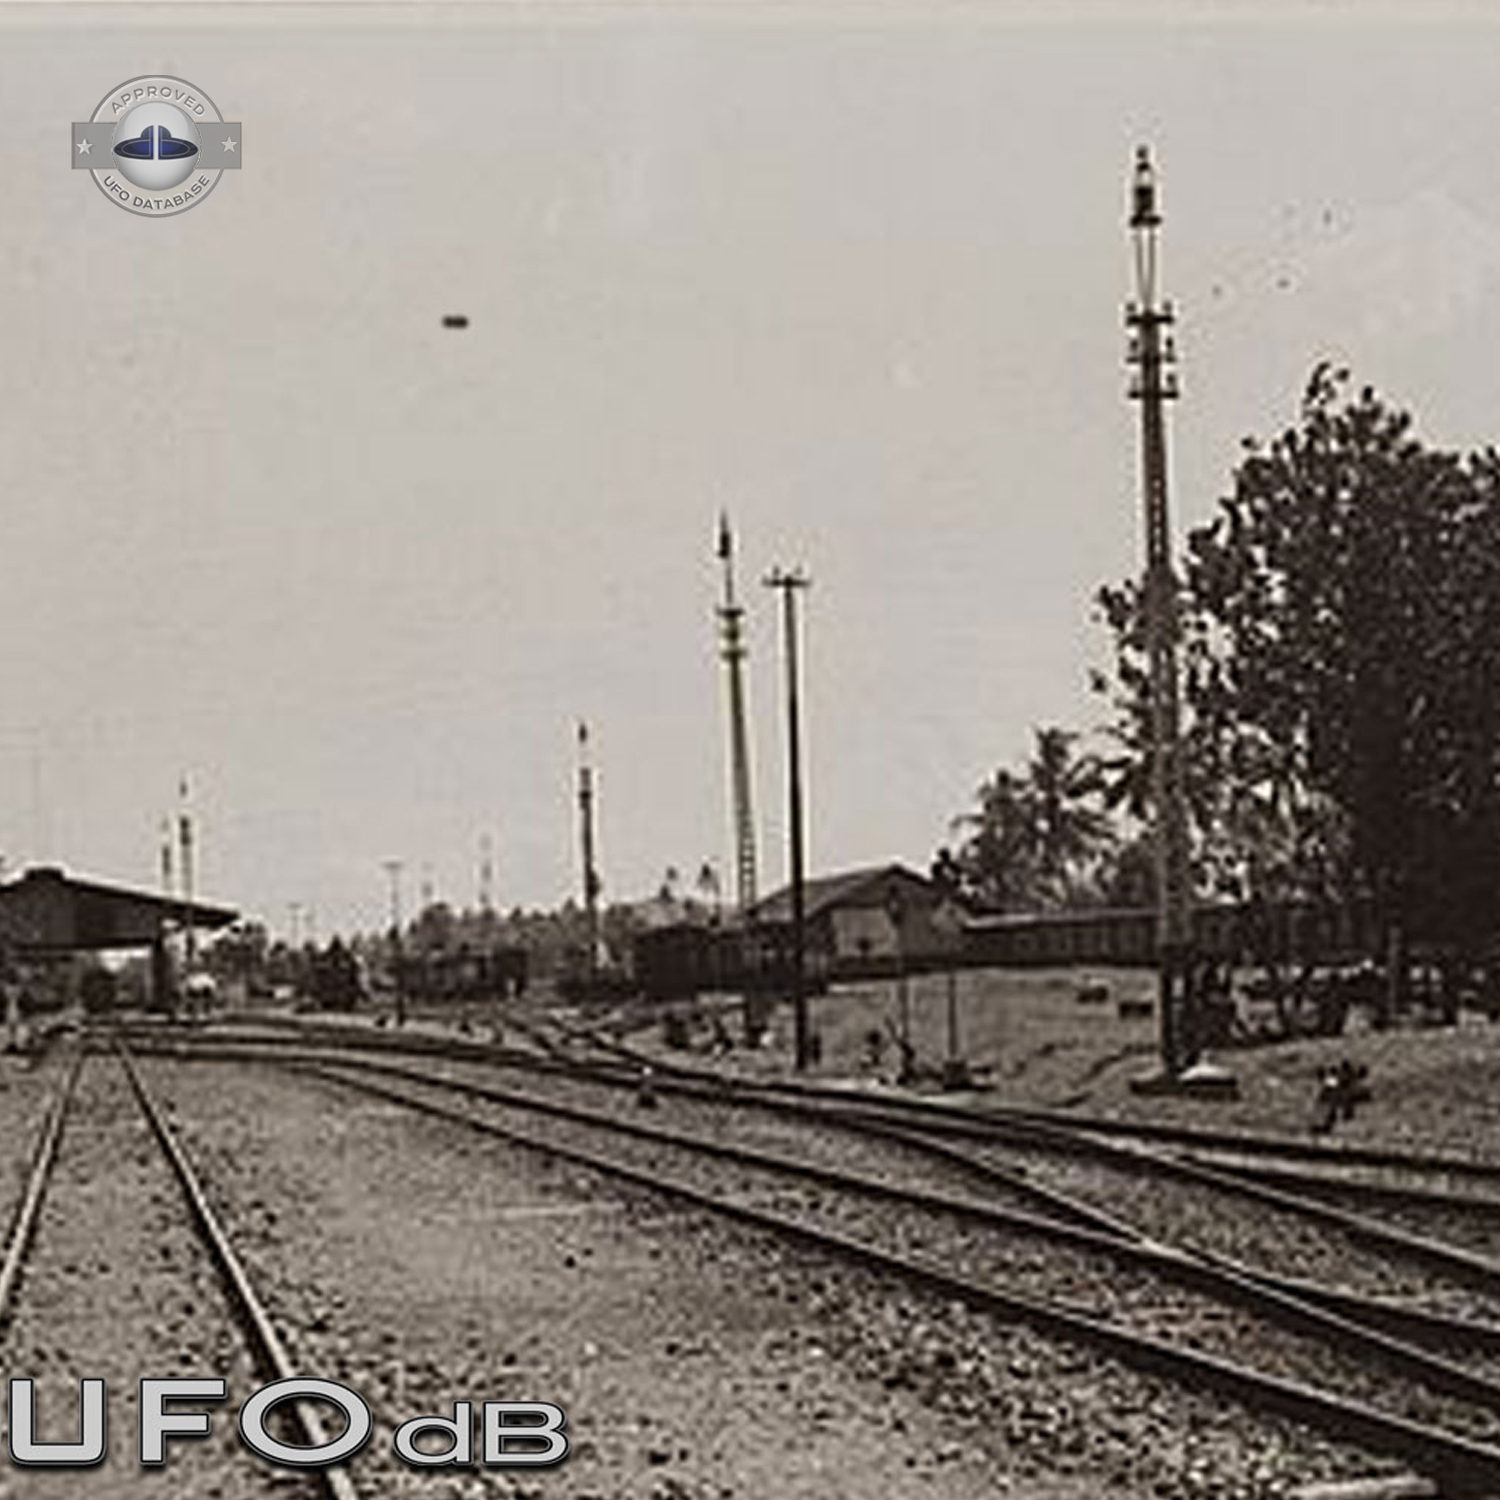 1935 | During the construction of the Dutch colonial state railway UFO Picture #121-2